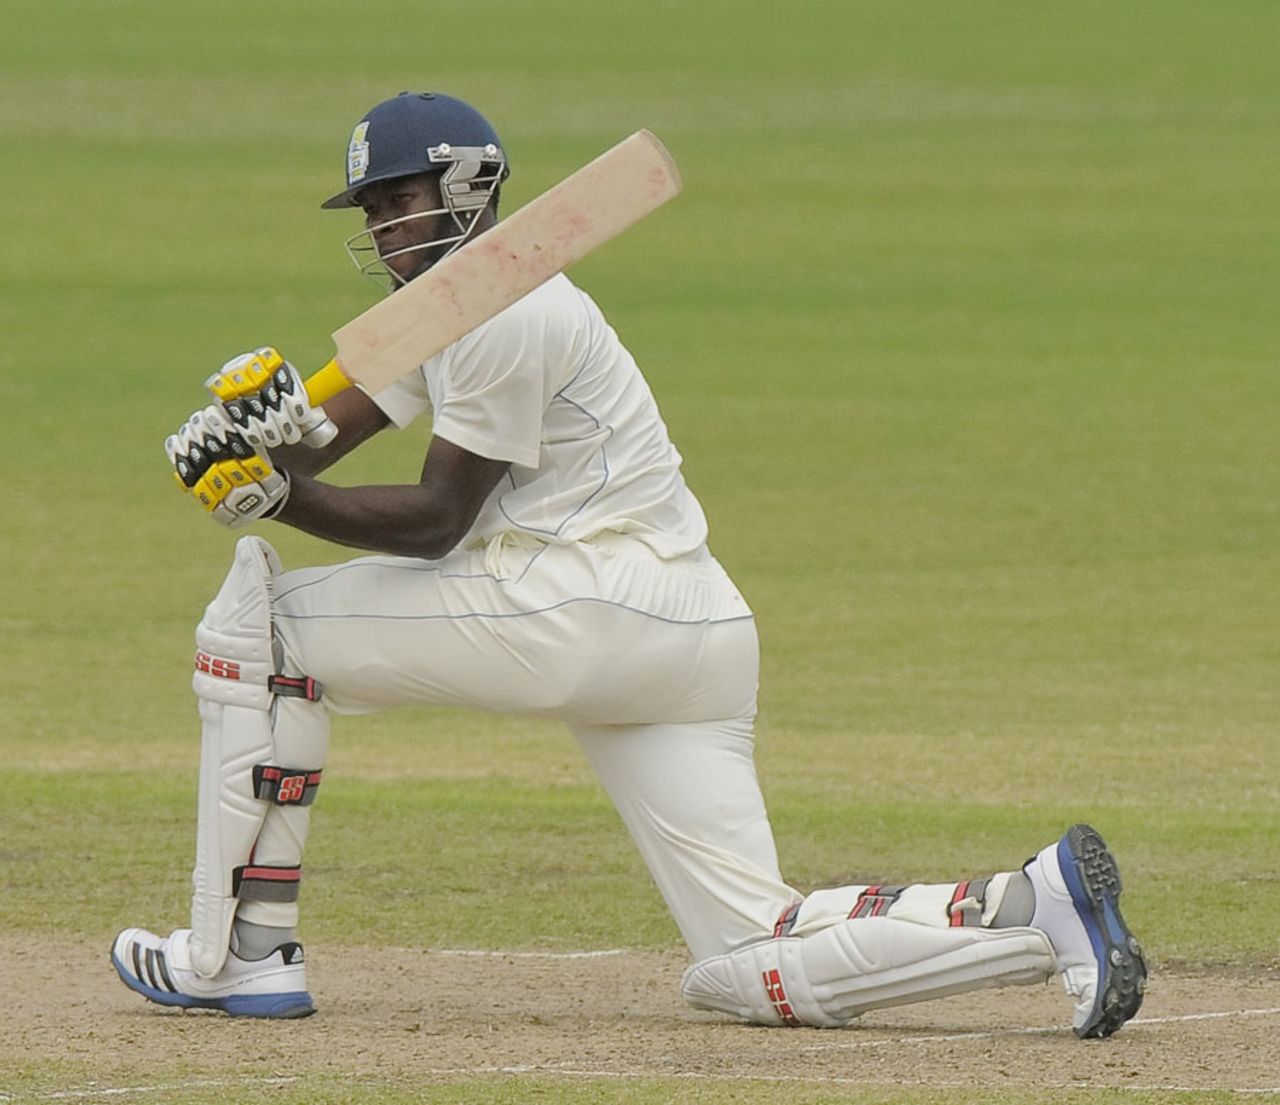 Kirk Edwards scored 120 for Barbados in their first innings against Guyana, Barbados v Guyana, Regional Four Day Competition, February 15-18